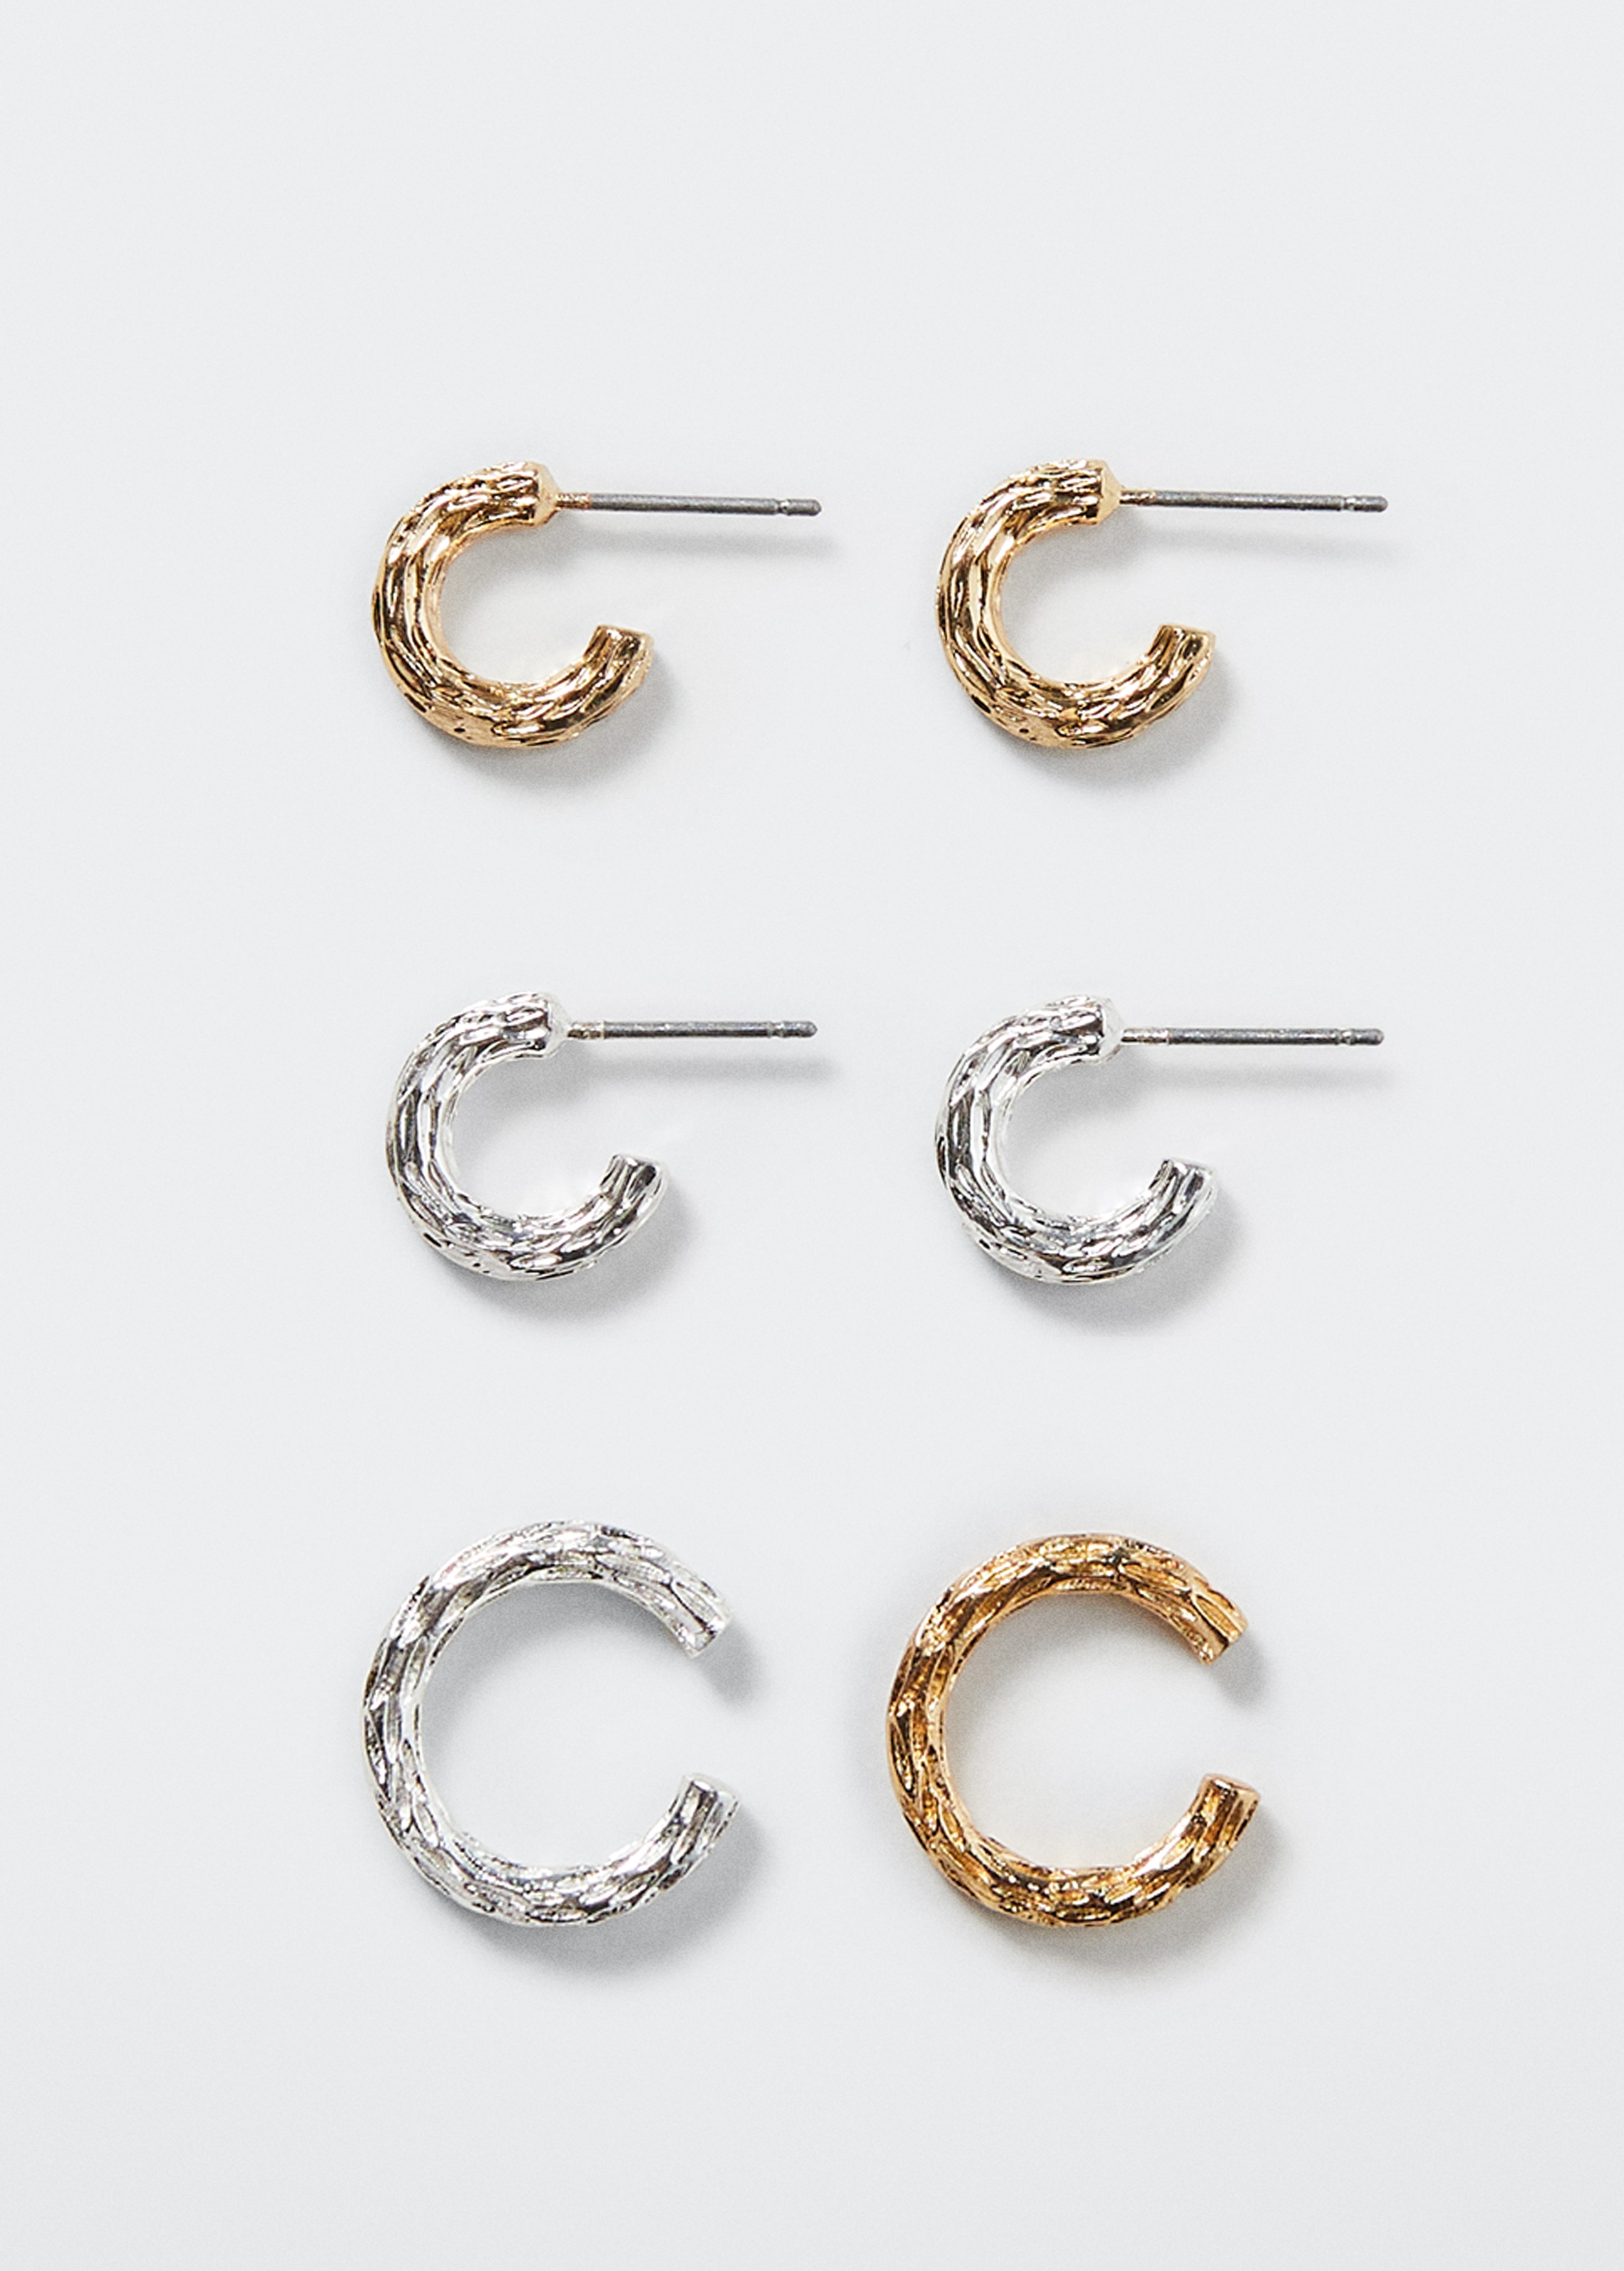 Pack of 3 earrings - Article without model